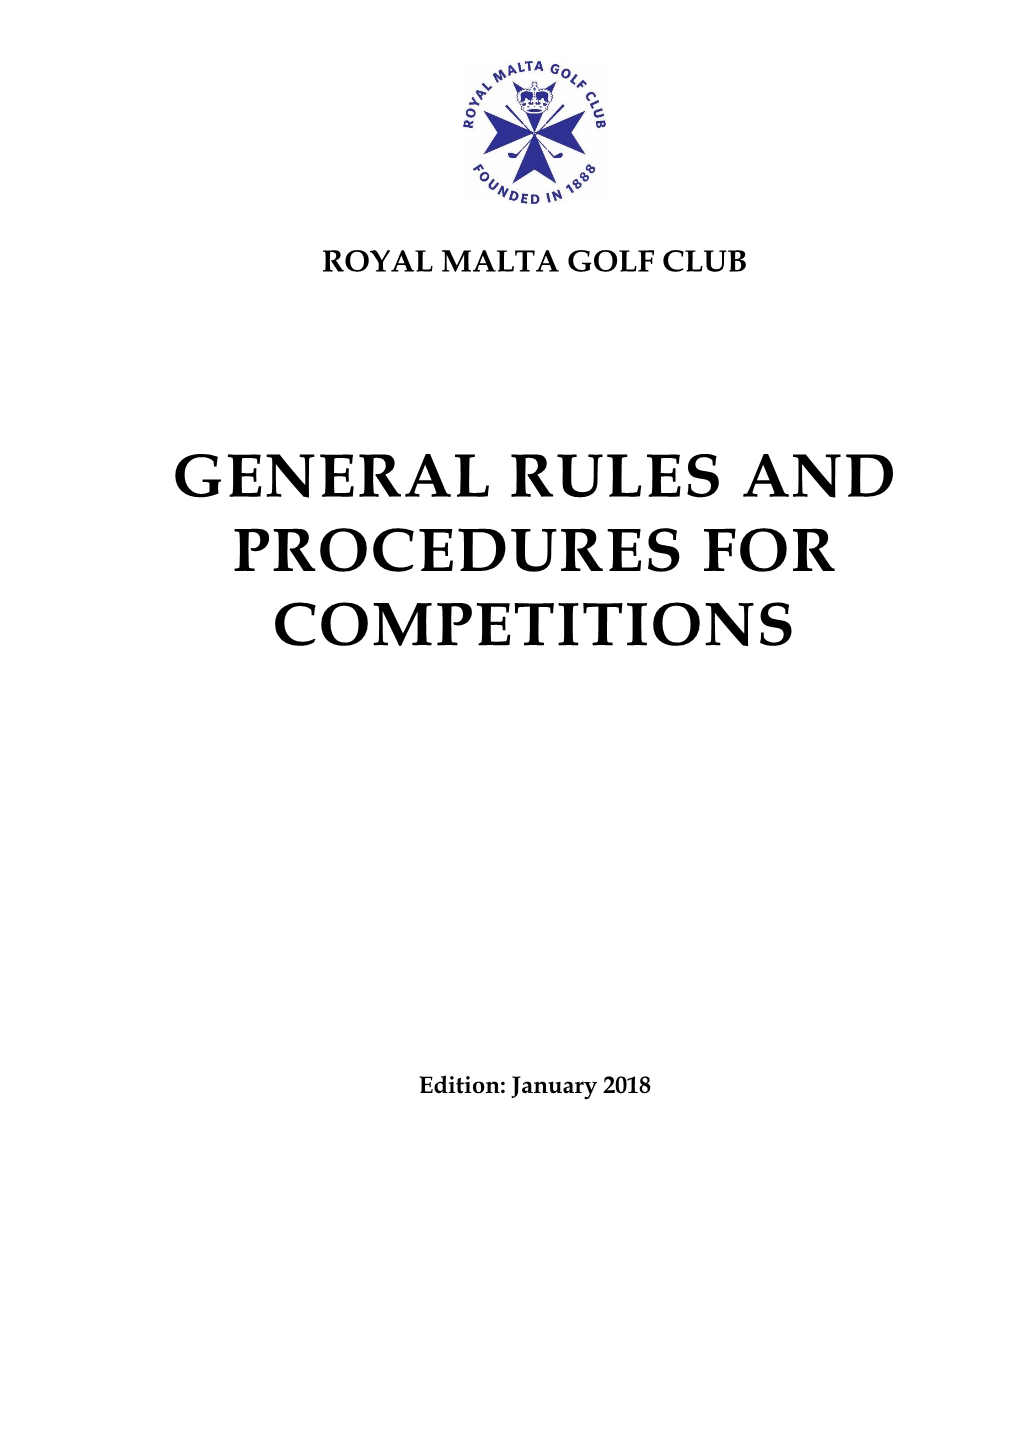 General Rules and Procedures for Competitions